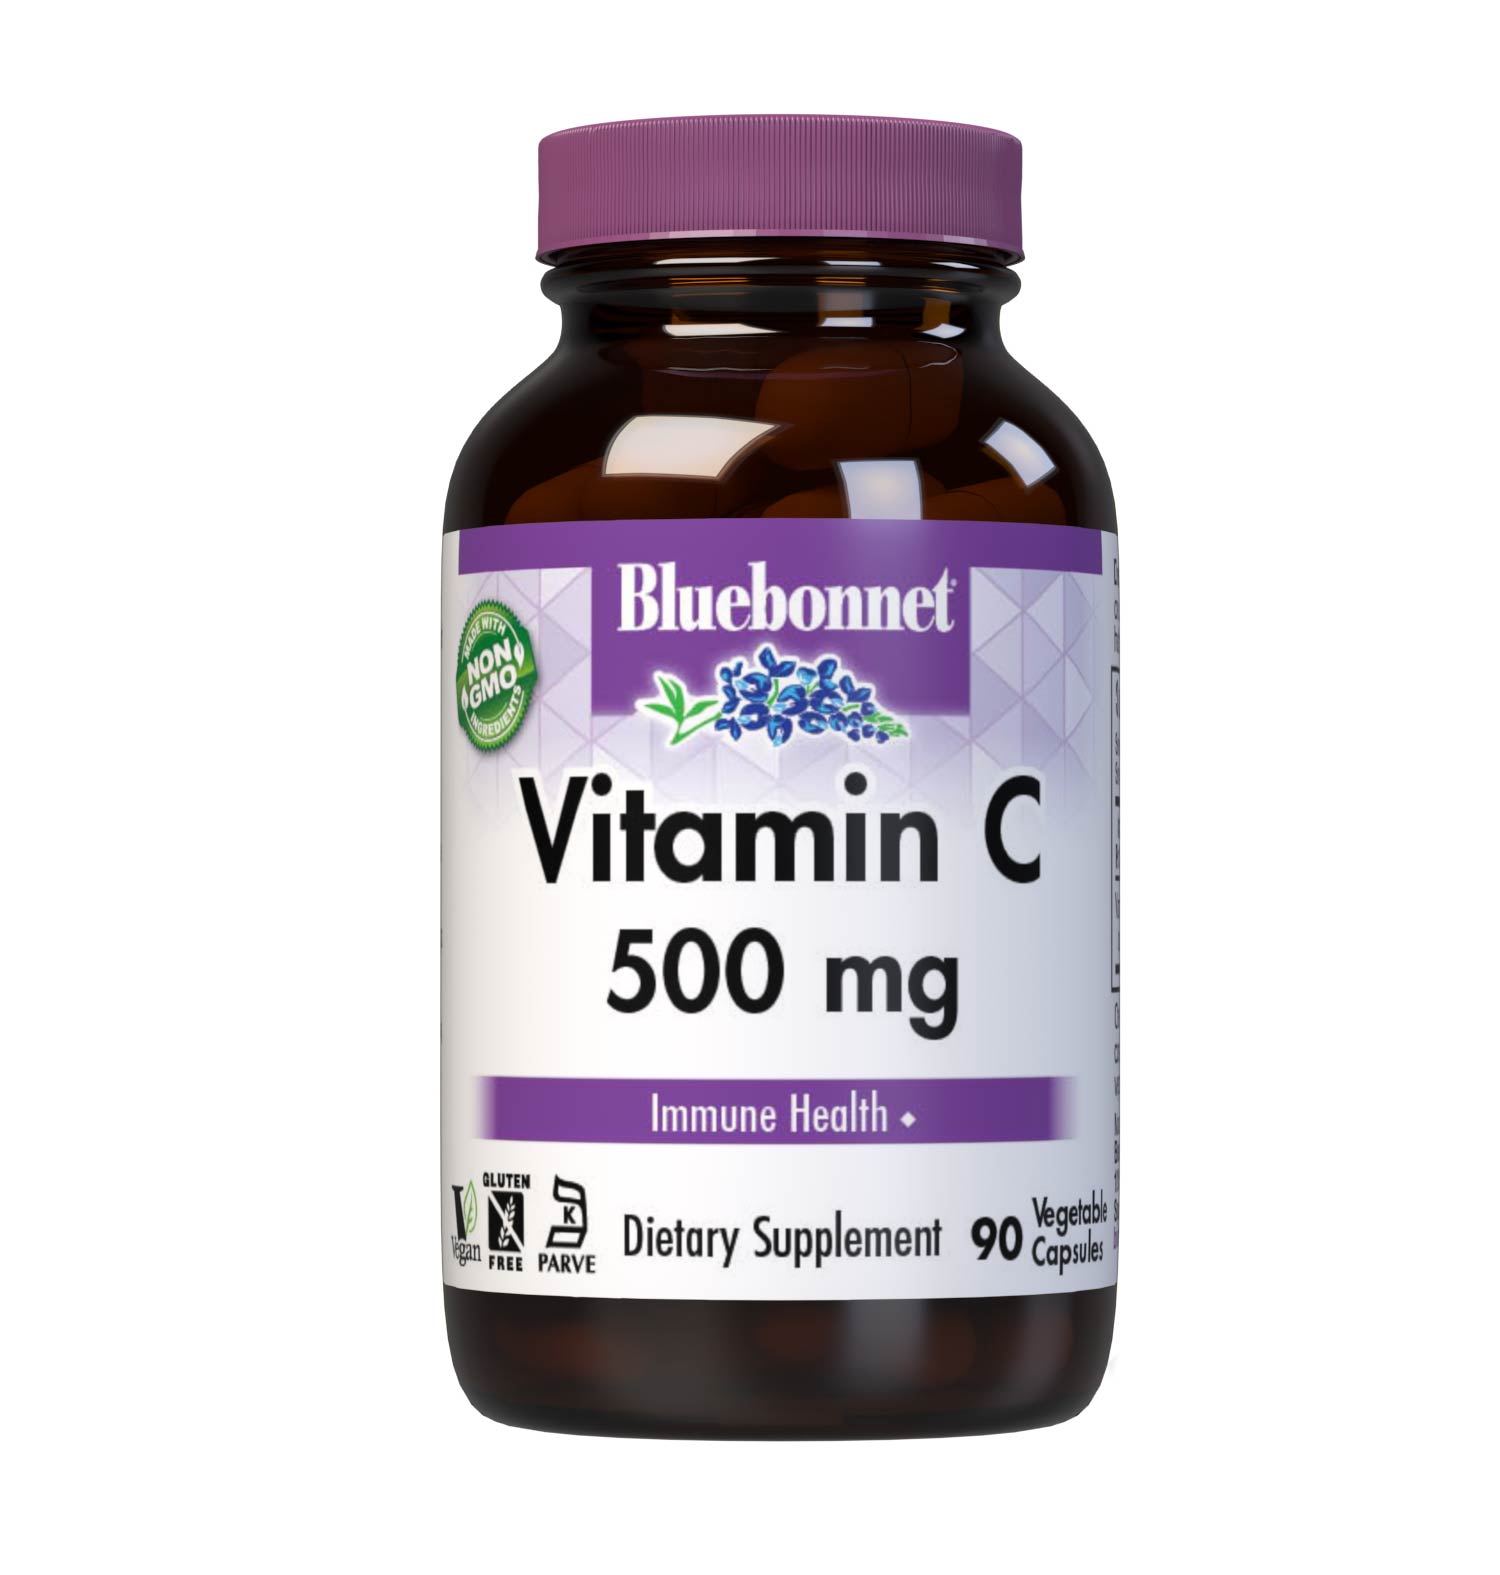 Bluebonnet’s Vitamin C-500 mg 90 Vegetable Capsules are formulated with vitamin C from L-ascorbic acid that is (IP) identity-preserved and non-GMO to help support immune health. #size_90 count